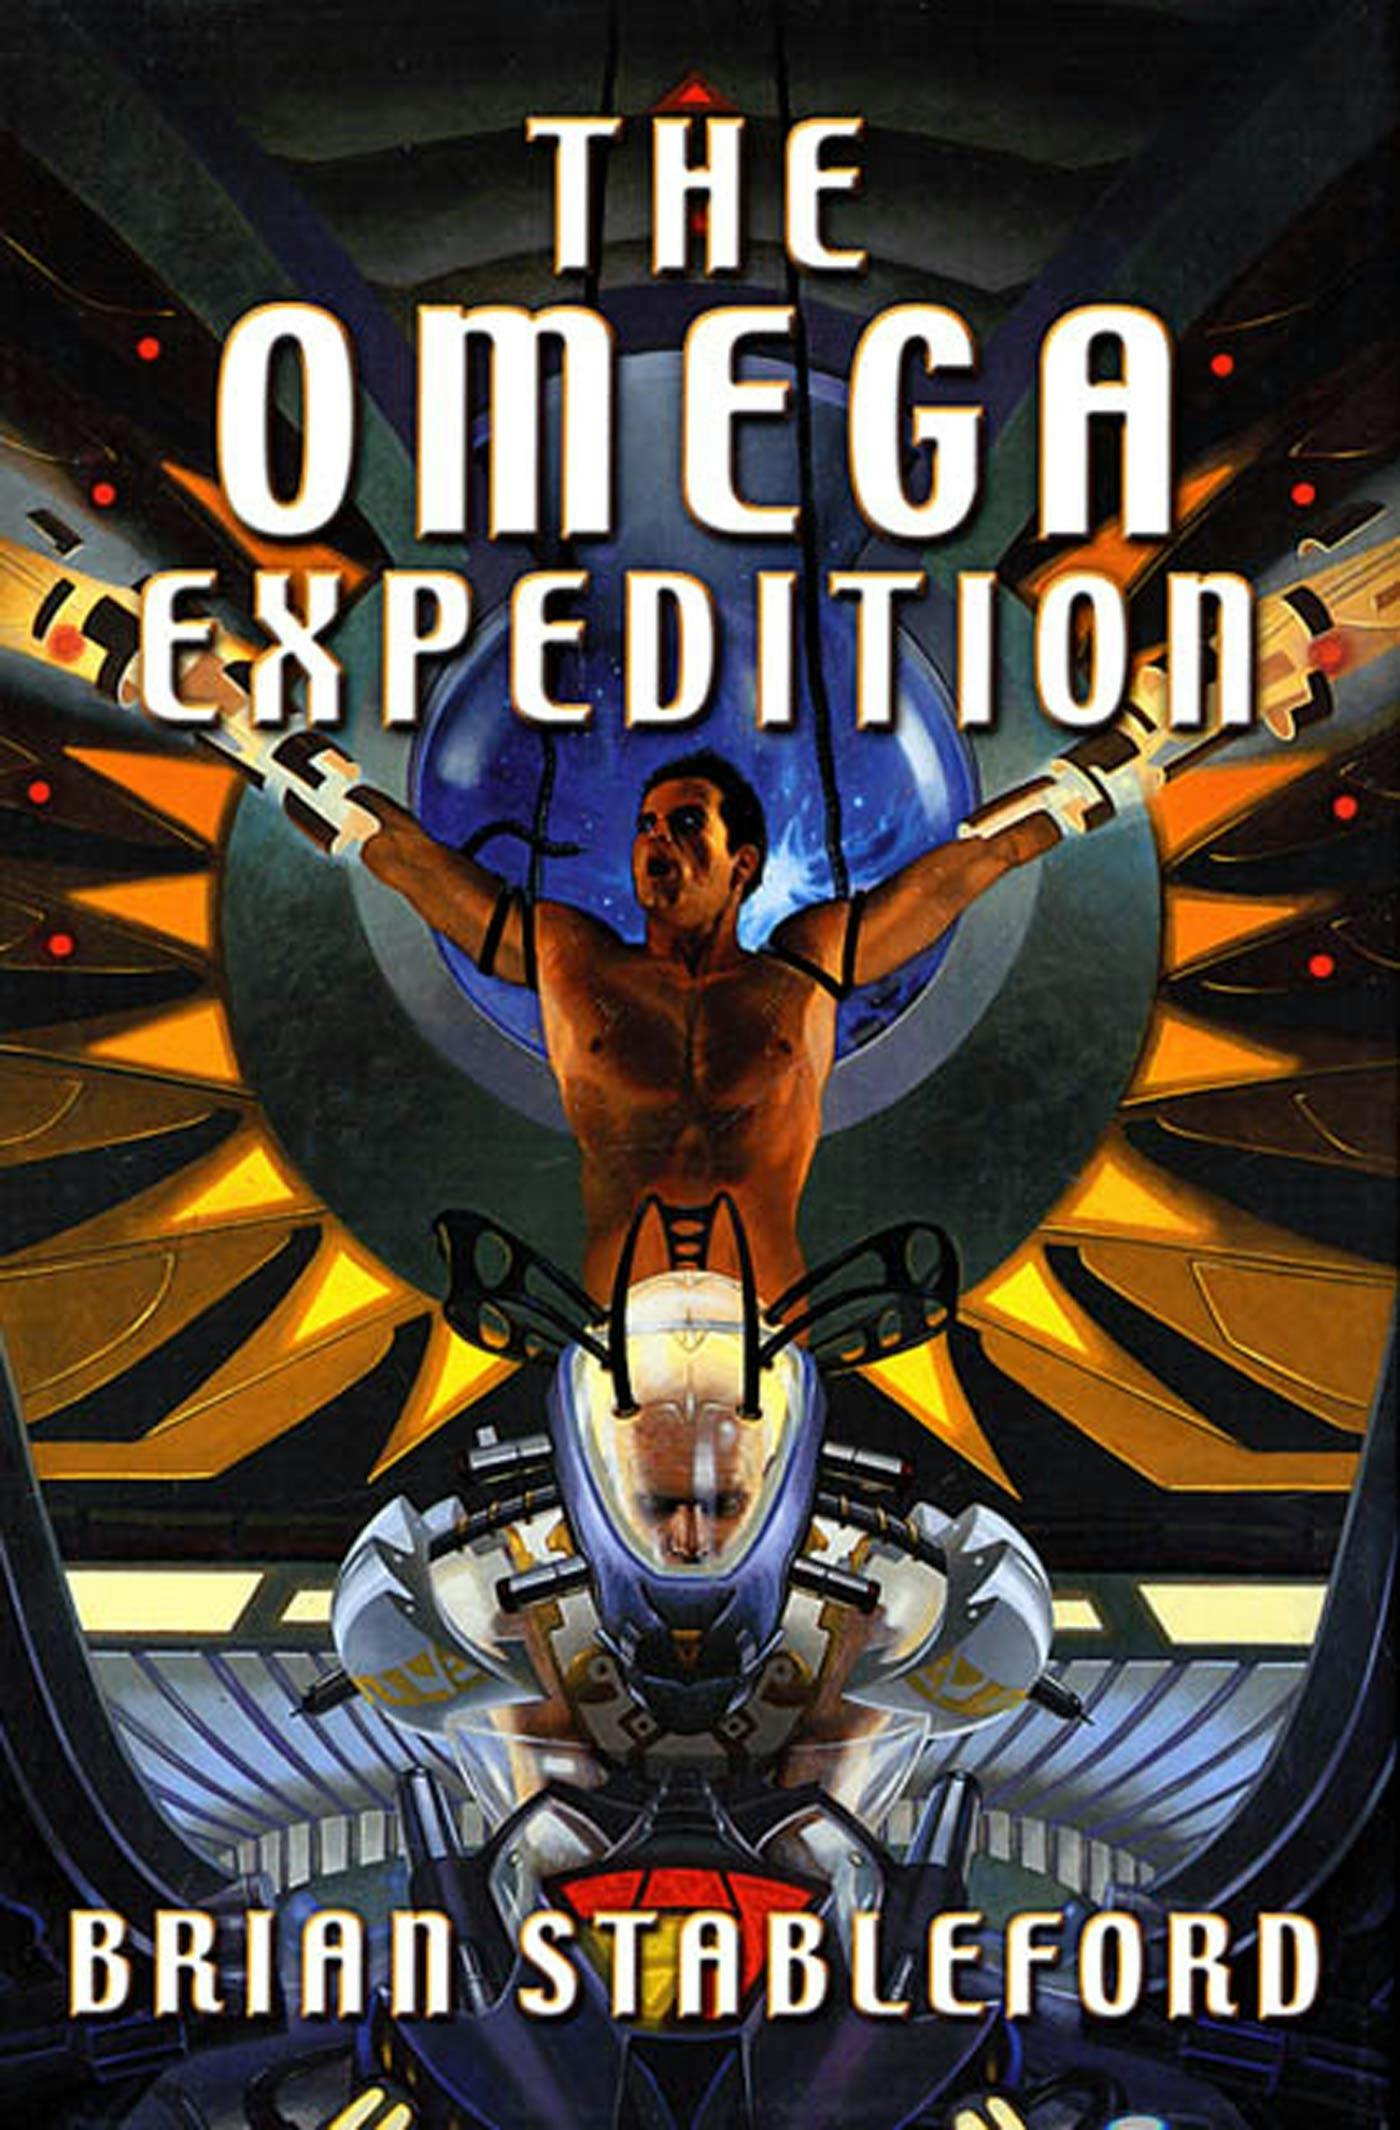 Cover for the book titled as: The Omega Expedition